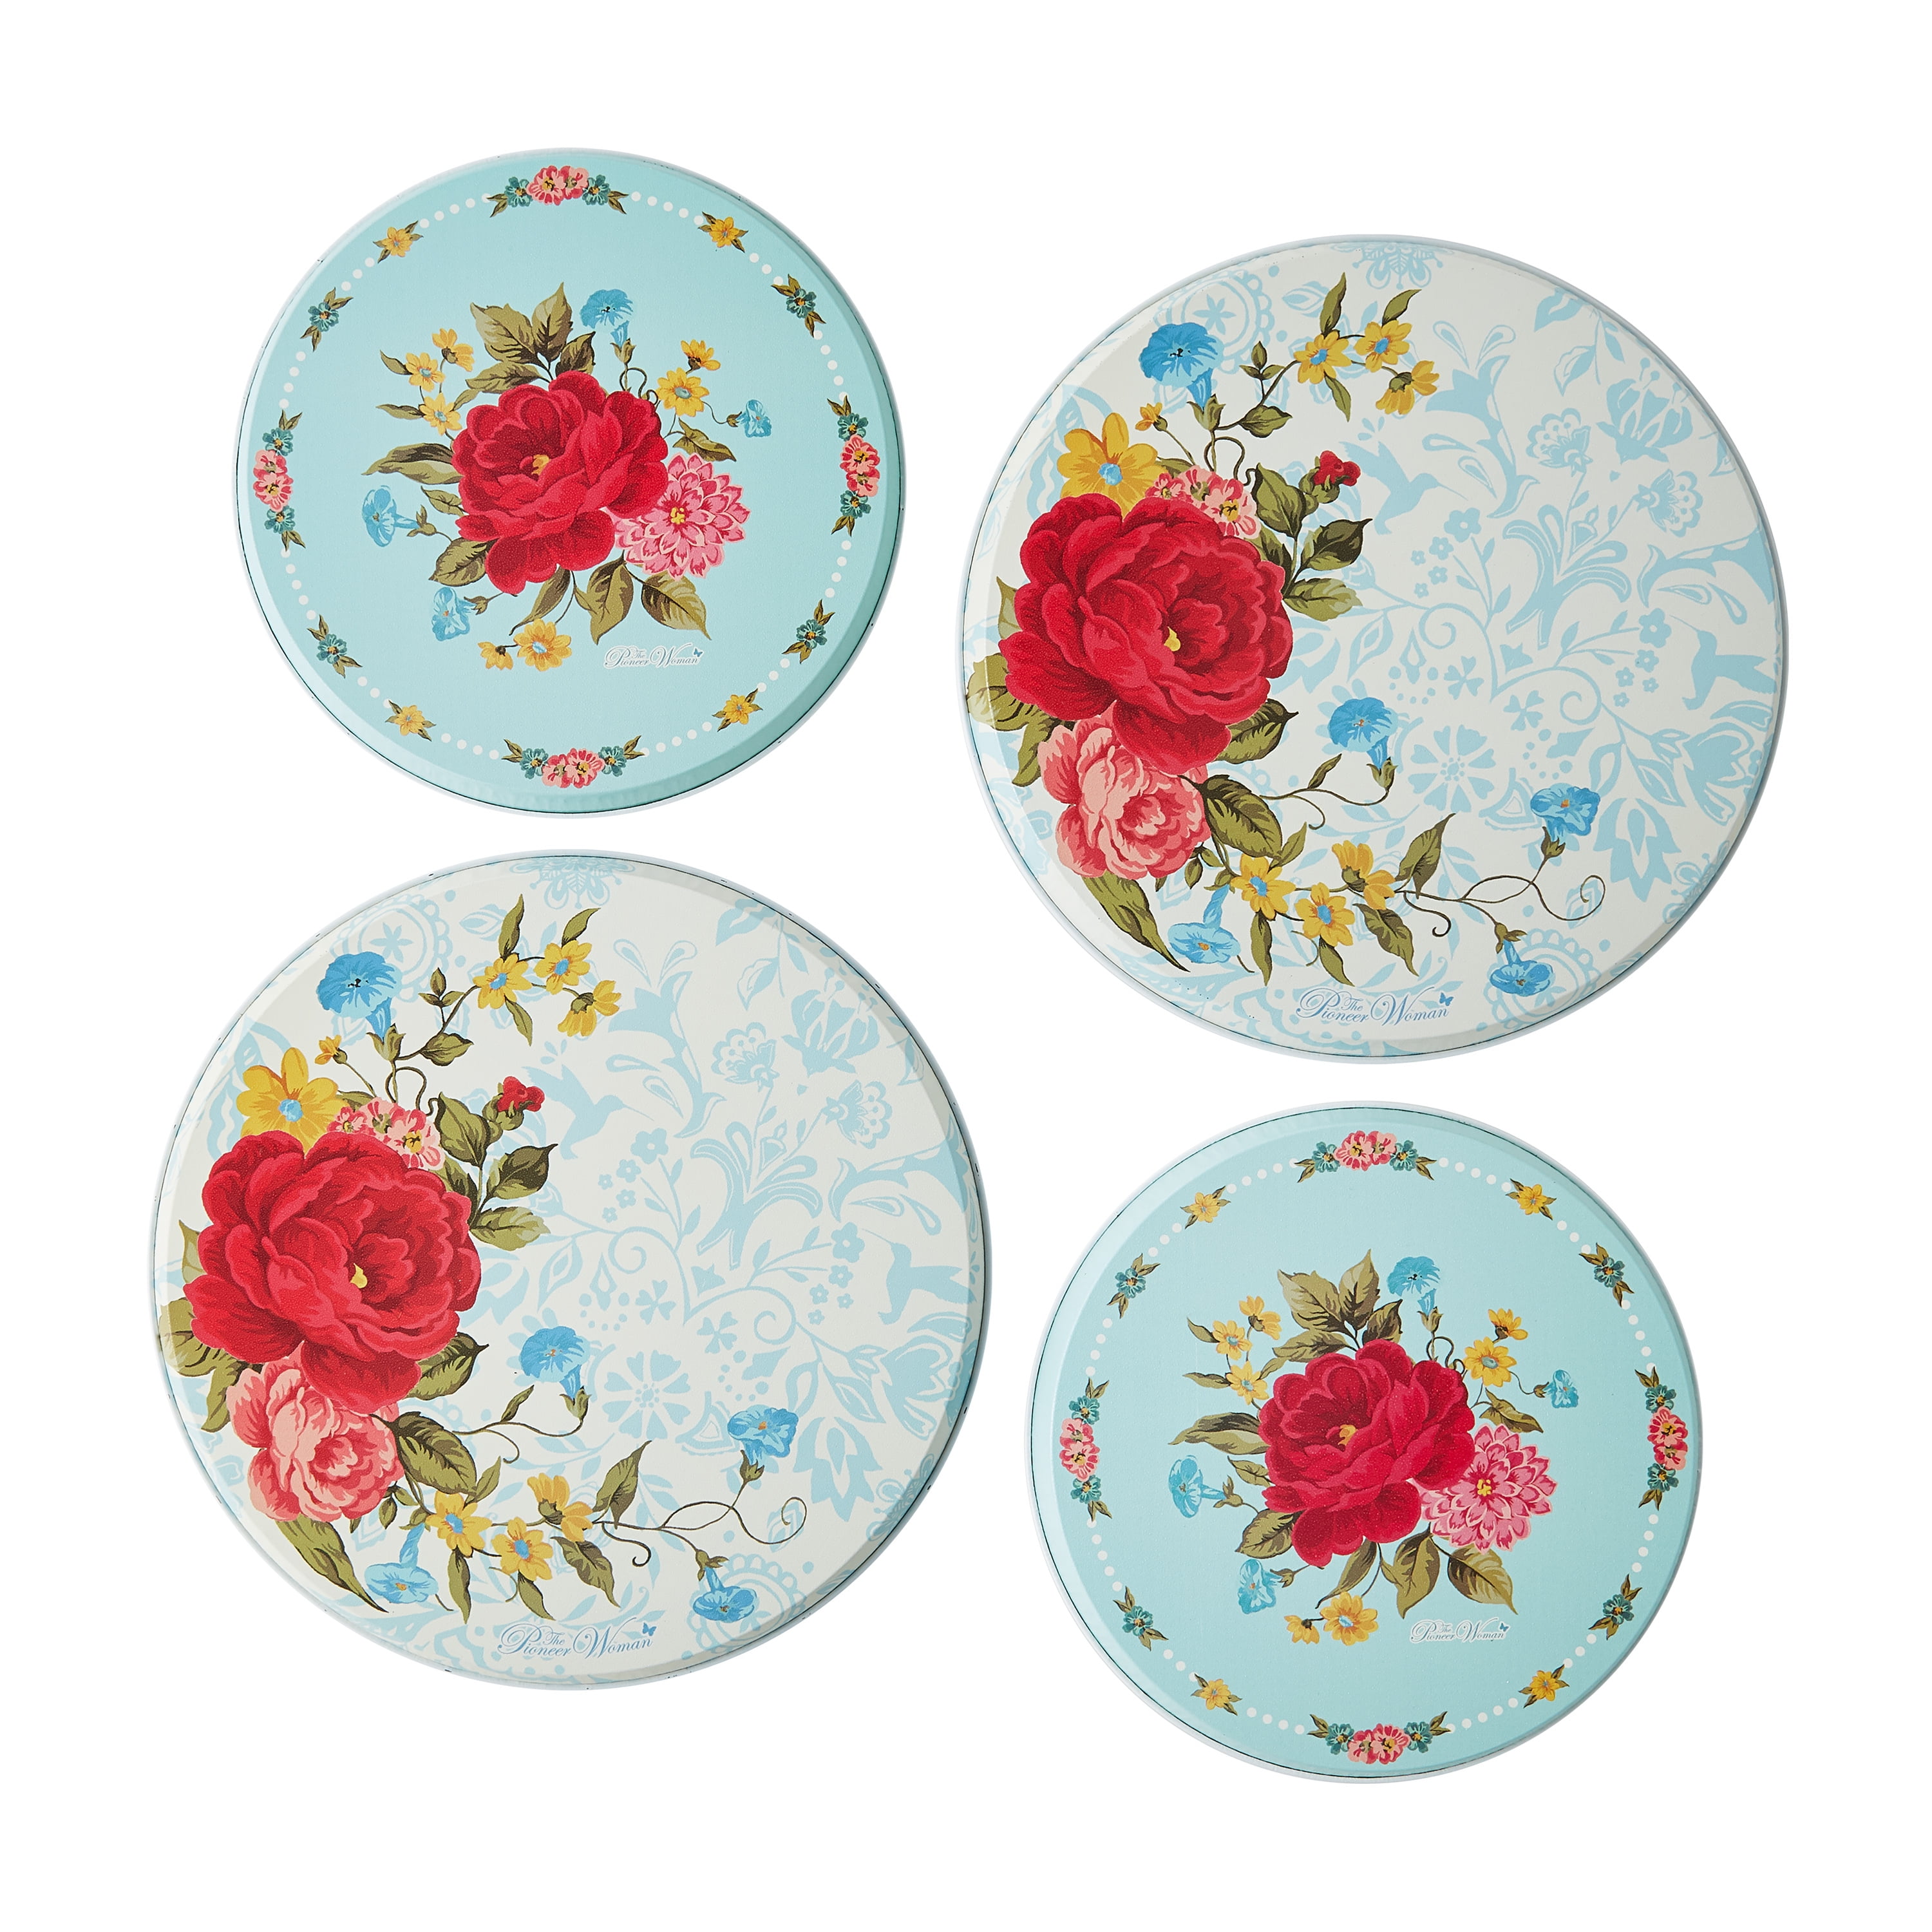 The Pioneer Woman Sweet Rose Stove Burner Covers, 4 Count